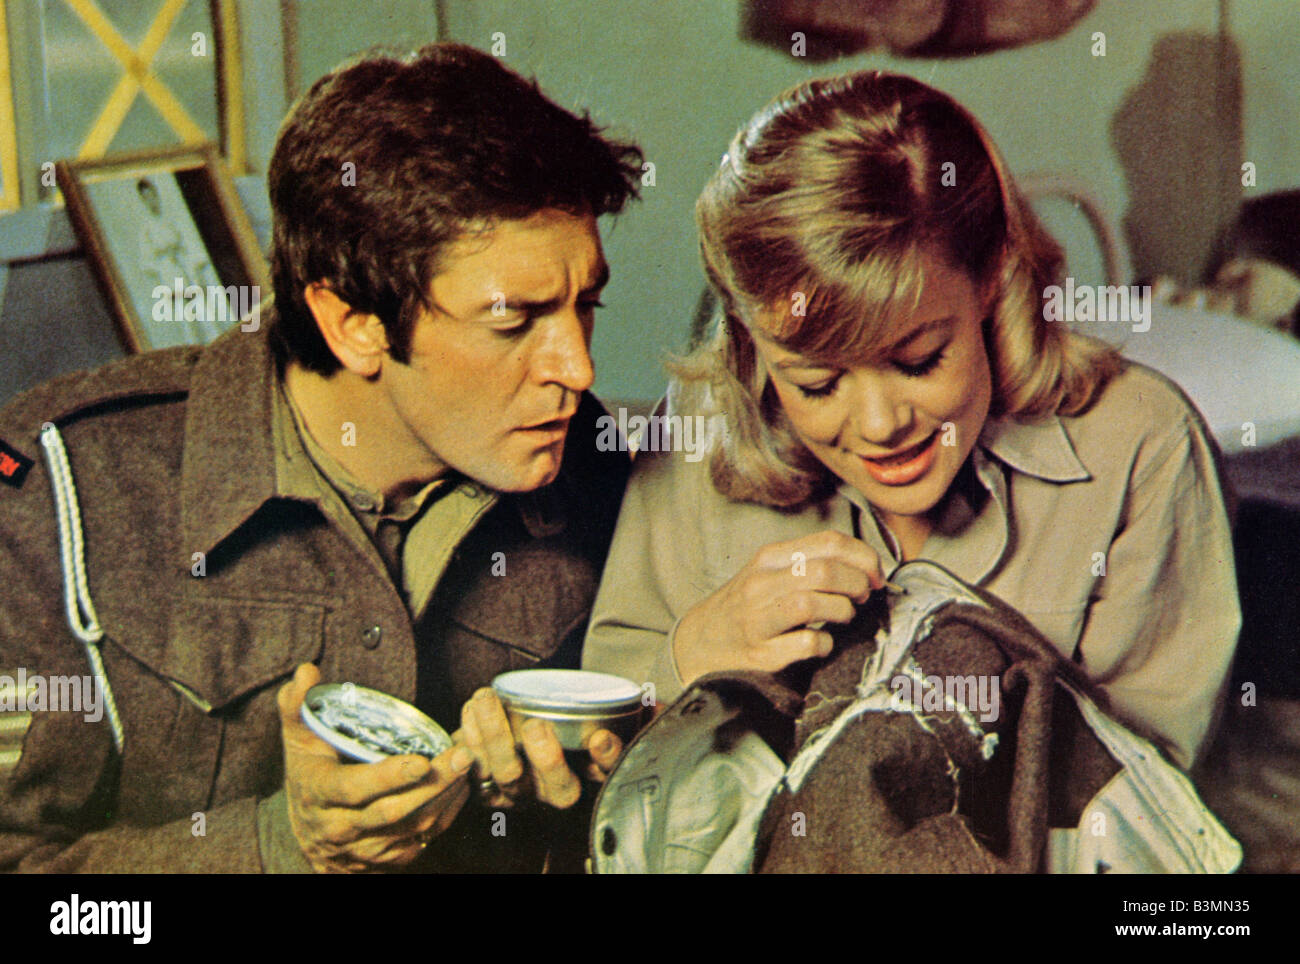 Portare in Inghilterra 1976 Rank/Peter Rogers film con Judy Geeson Foto Stock